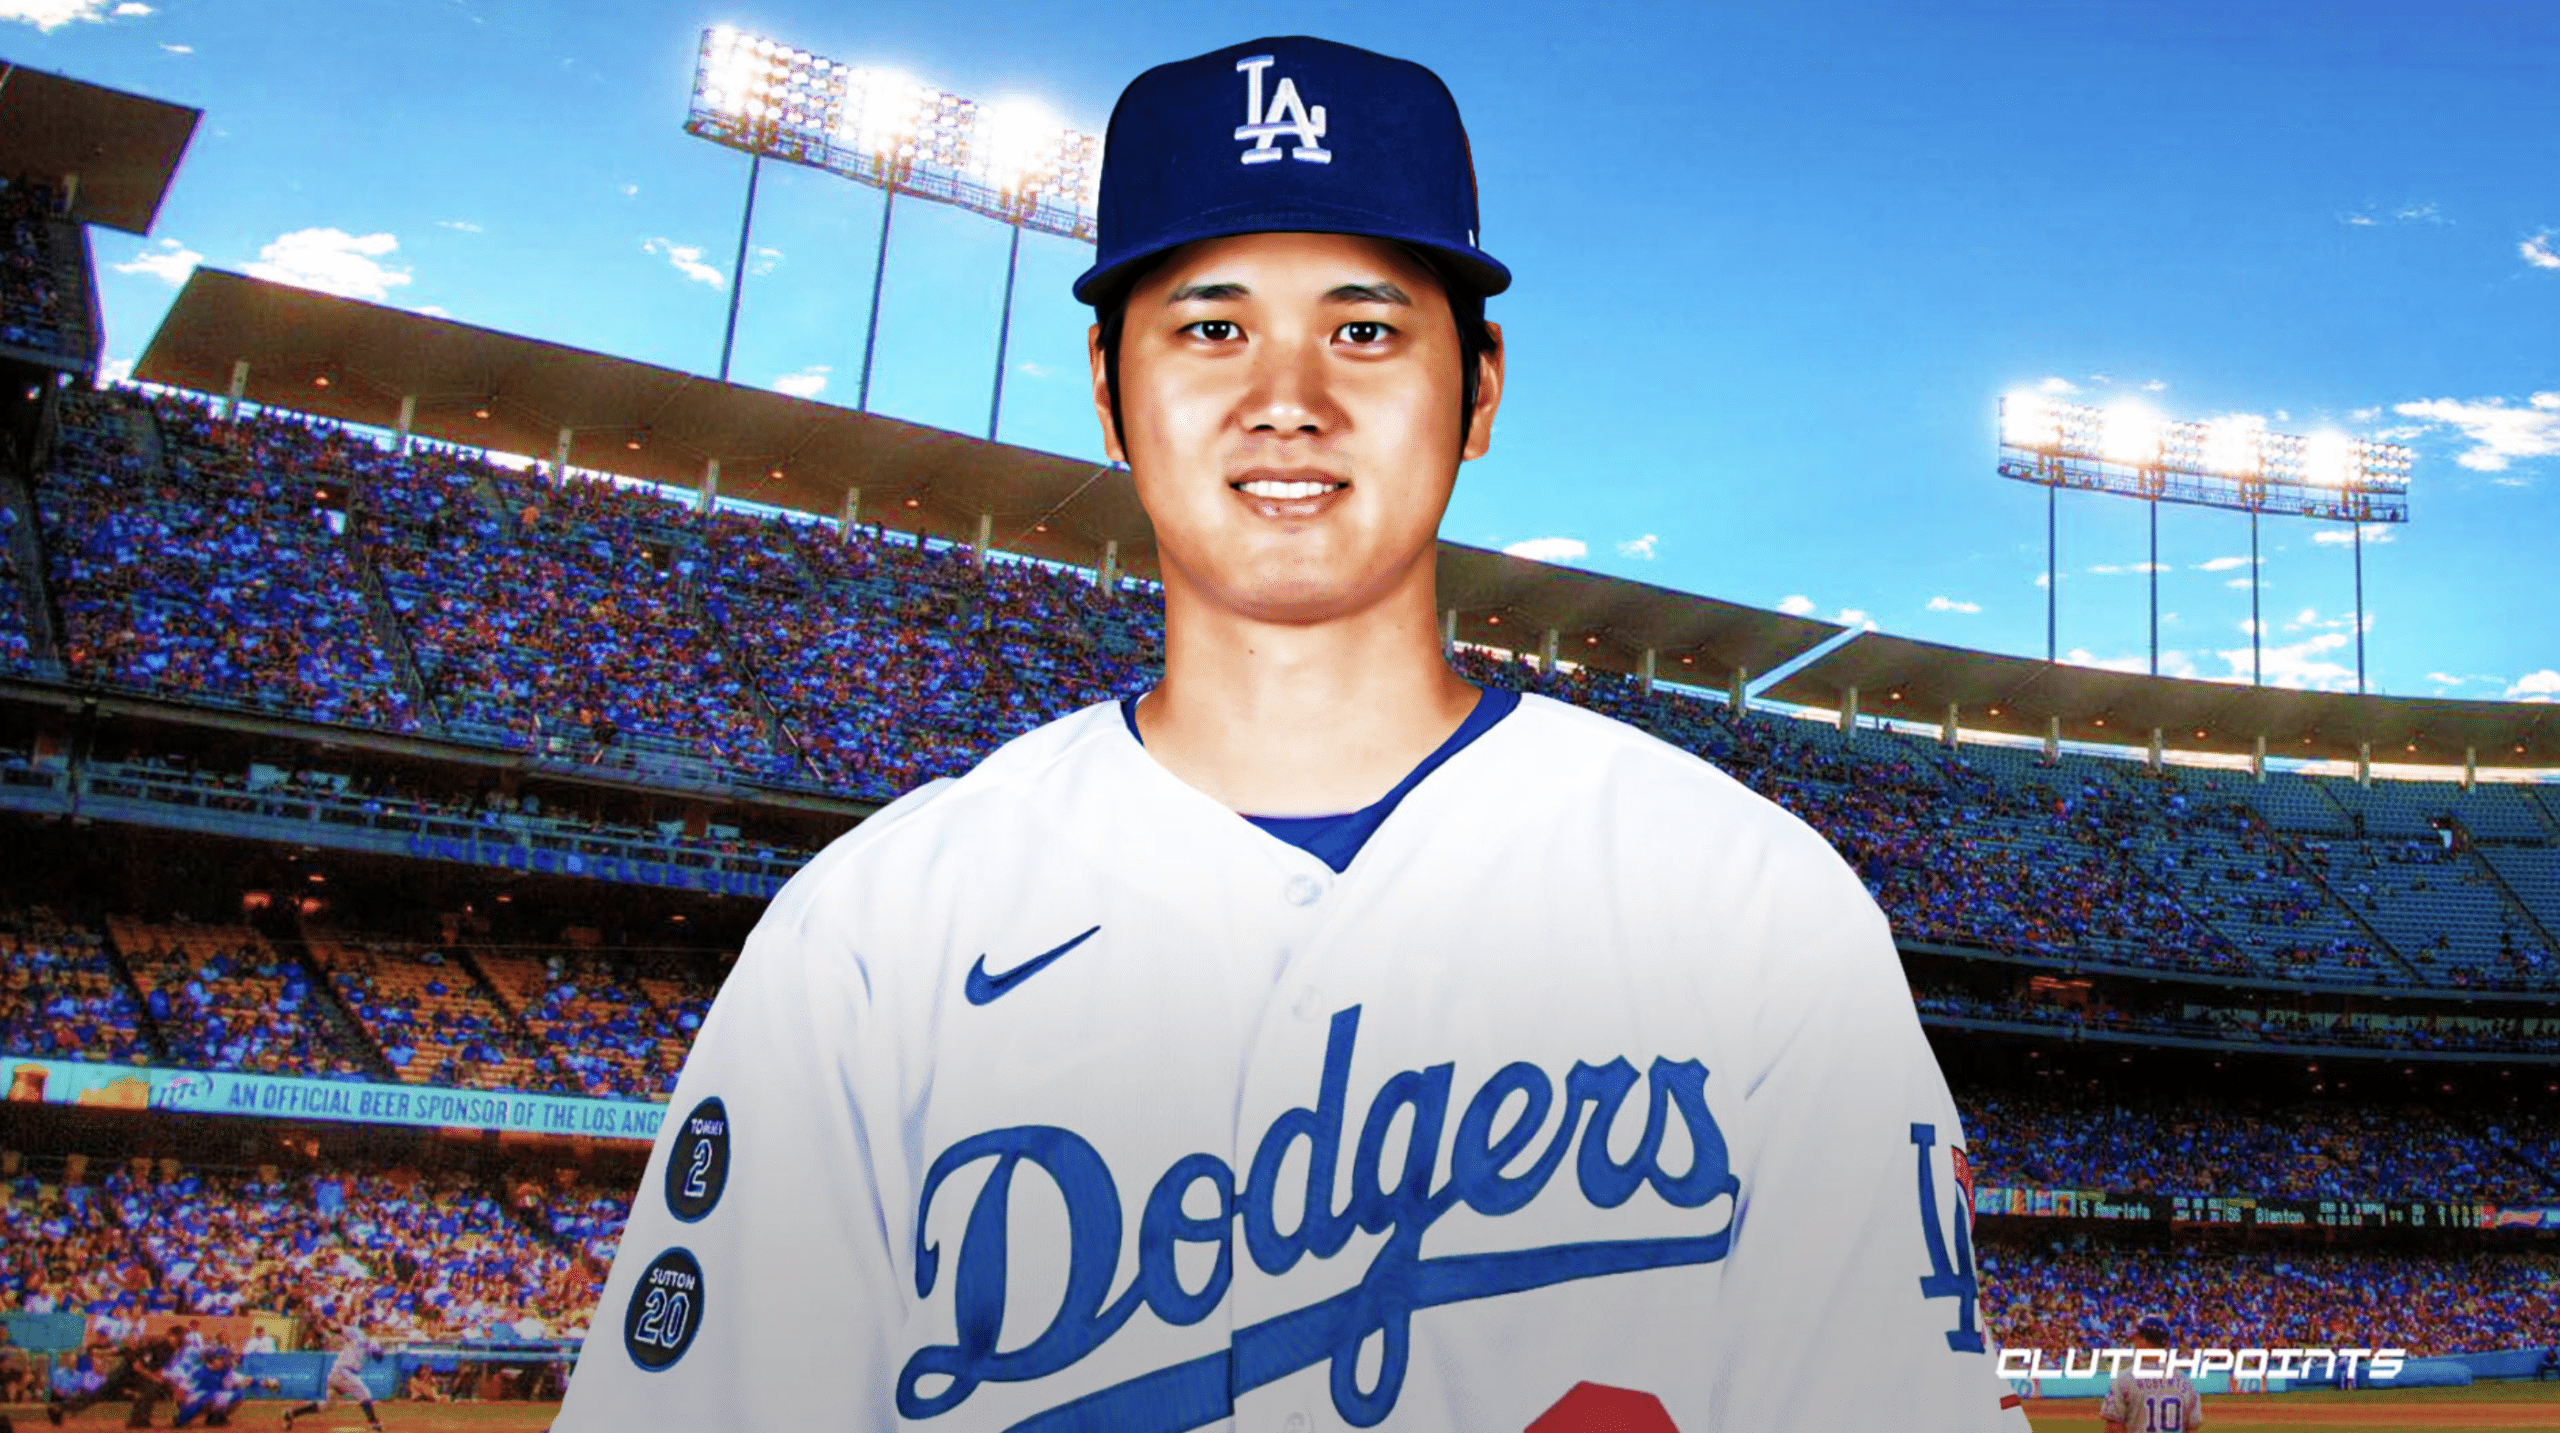 MVP Shohei Ohtani will play first game with Dodgers in Seoul